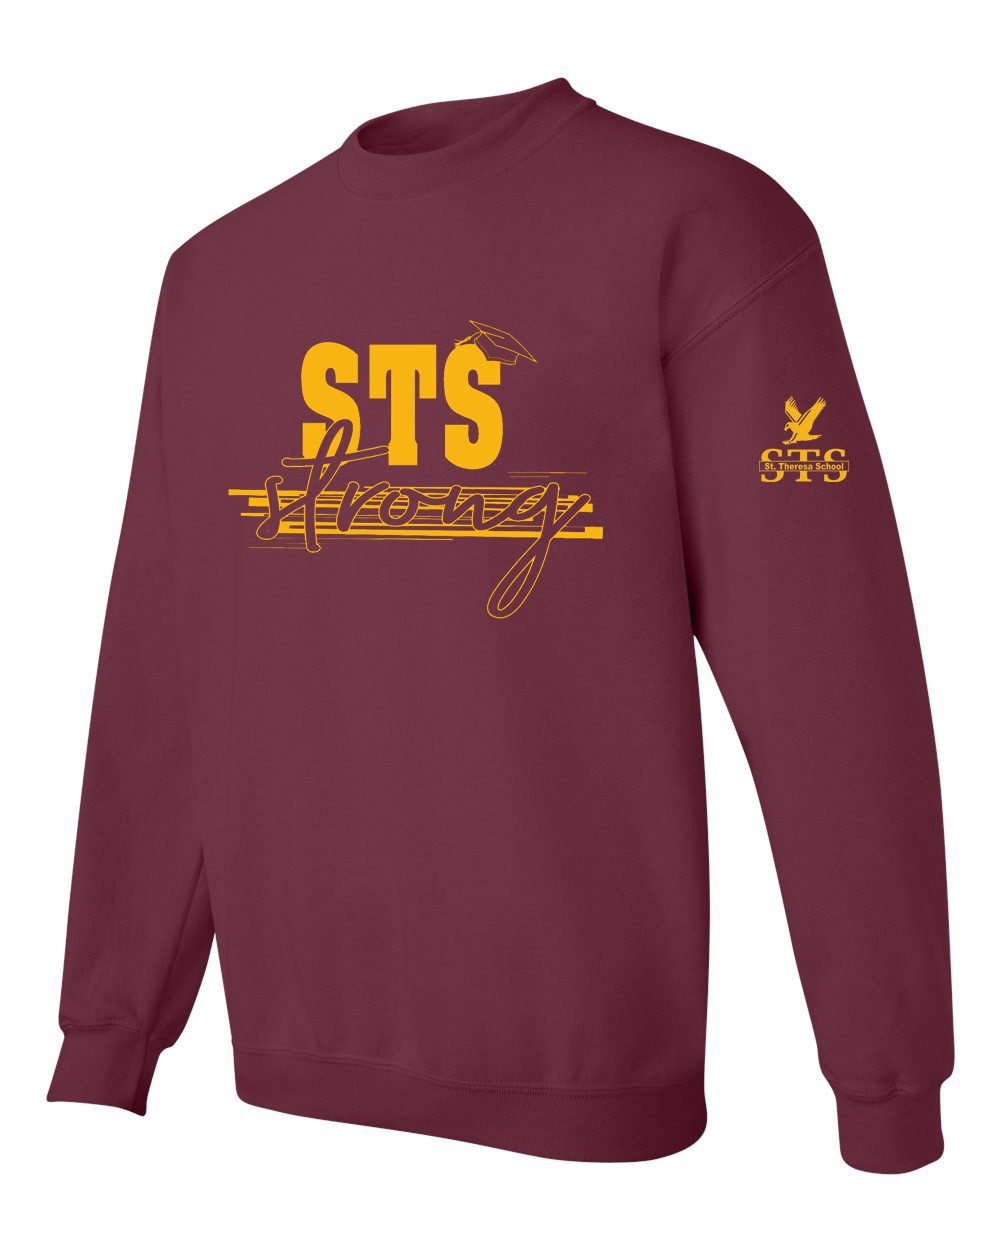 STS L/S Strong Spirit T-Shirt w/ Gold Logo - Please Allow 2-3 Weeks for Delivery